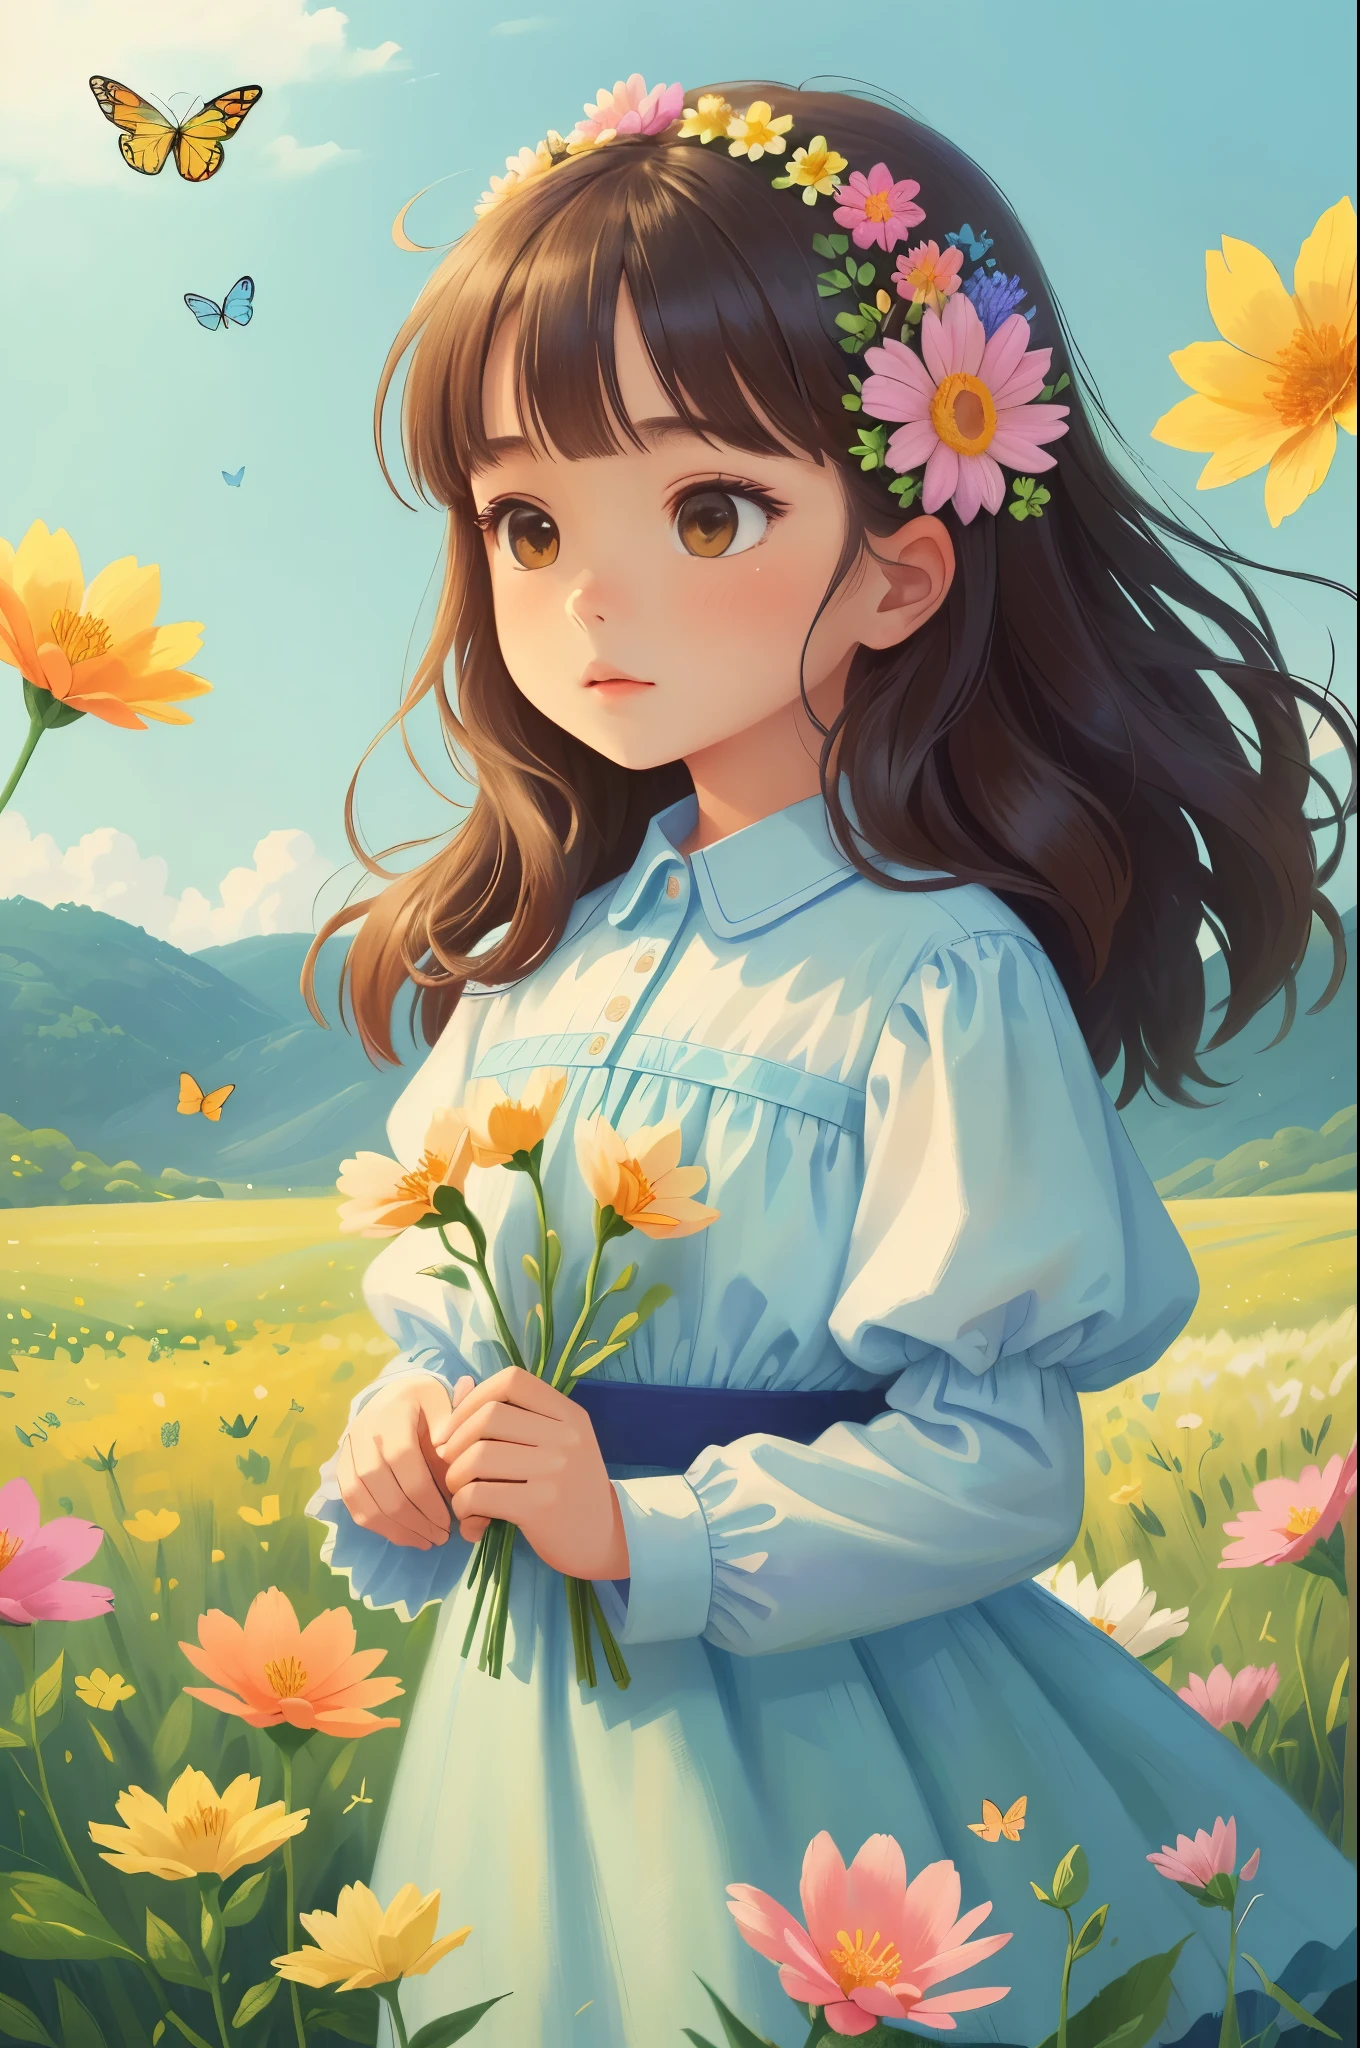 (best quality, masterpiece), 1 girl , wind, in a field of blooming flowers,Upper body，（surrounded by flowers），Butterflies flying，（Sea of flowers）,flower field，Densely packed flowers， Bright and delicate flowers，Close-up of flowers， cartoon, colorful，